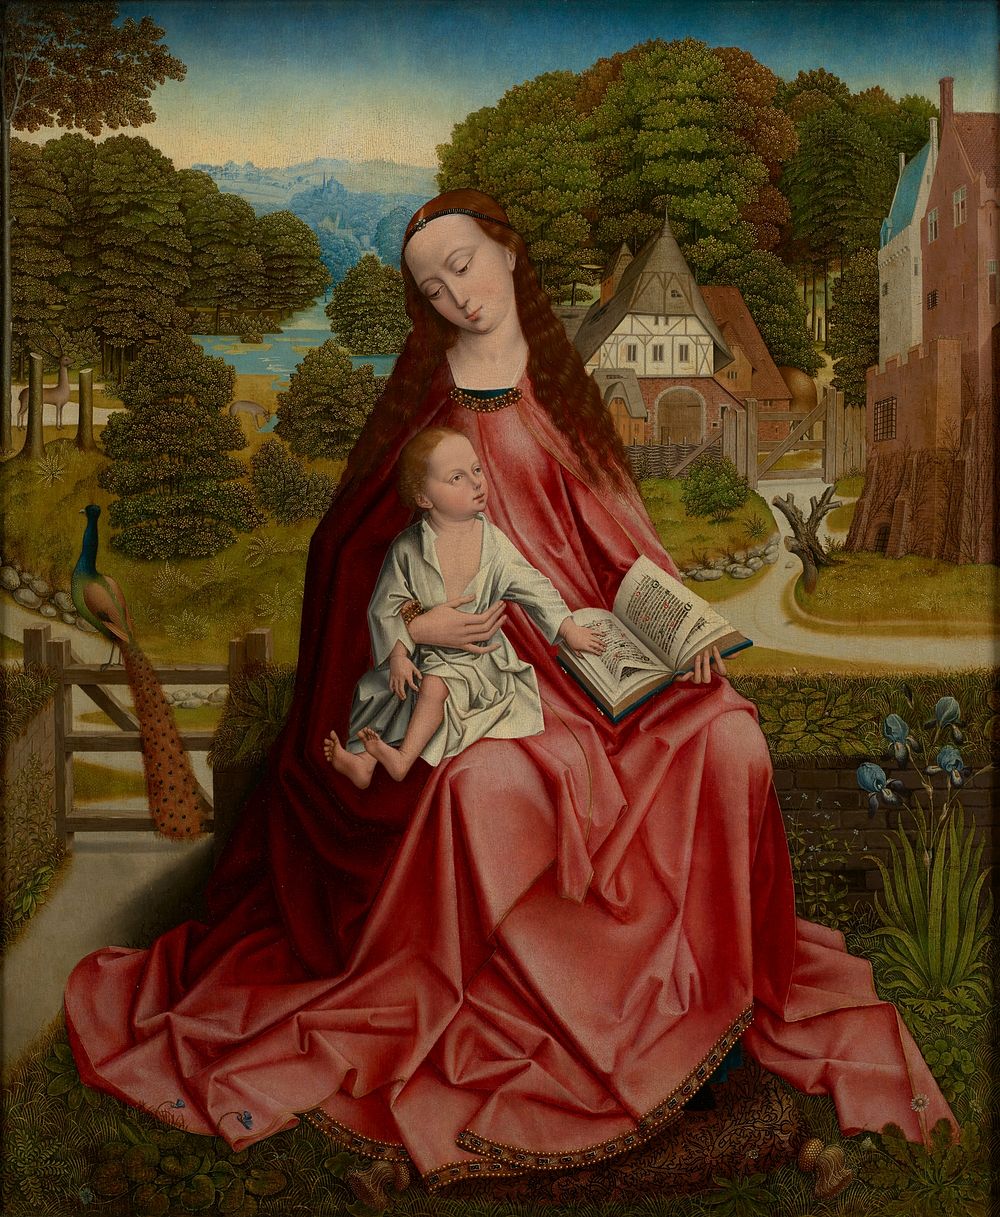 Madonna and Child. No signature or markings.. Original from the Minneapolis Institute of Art.